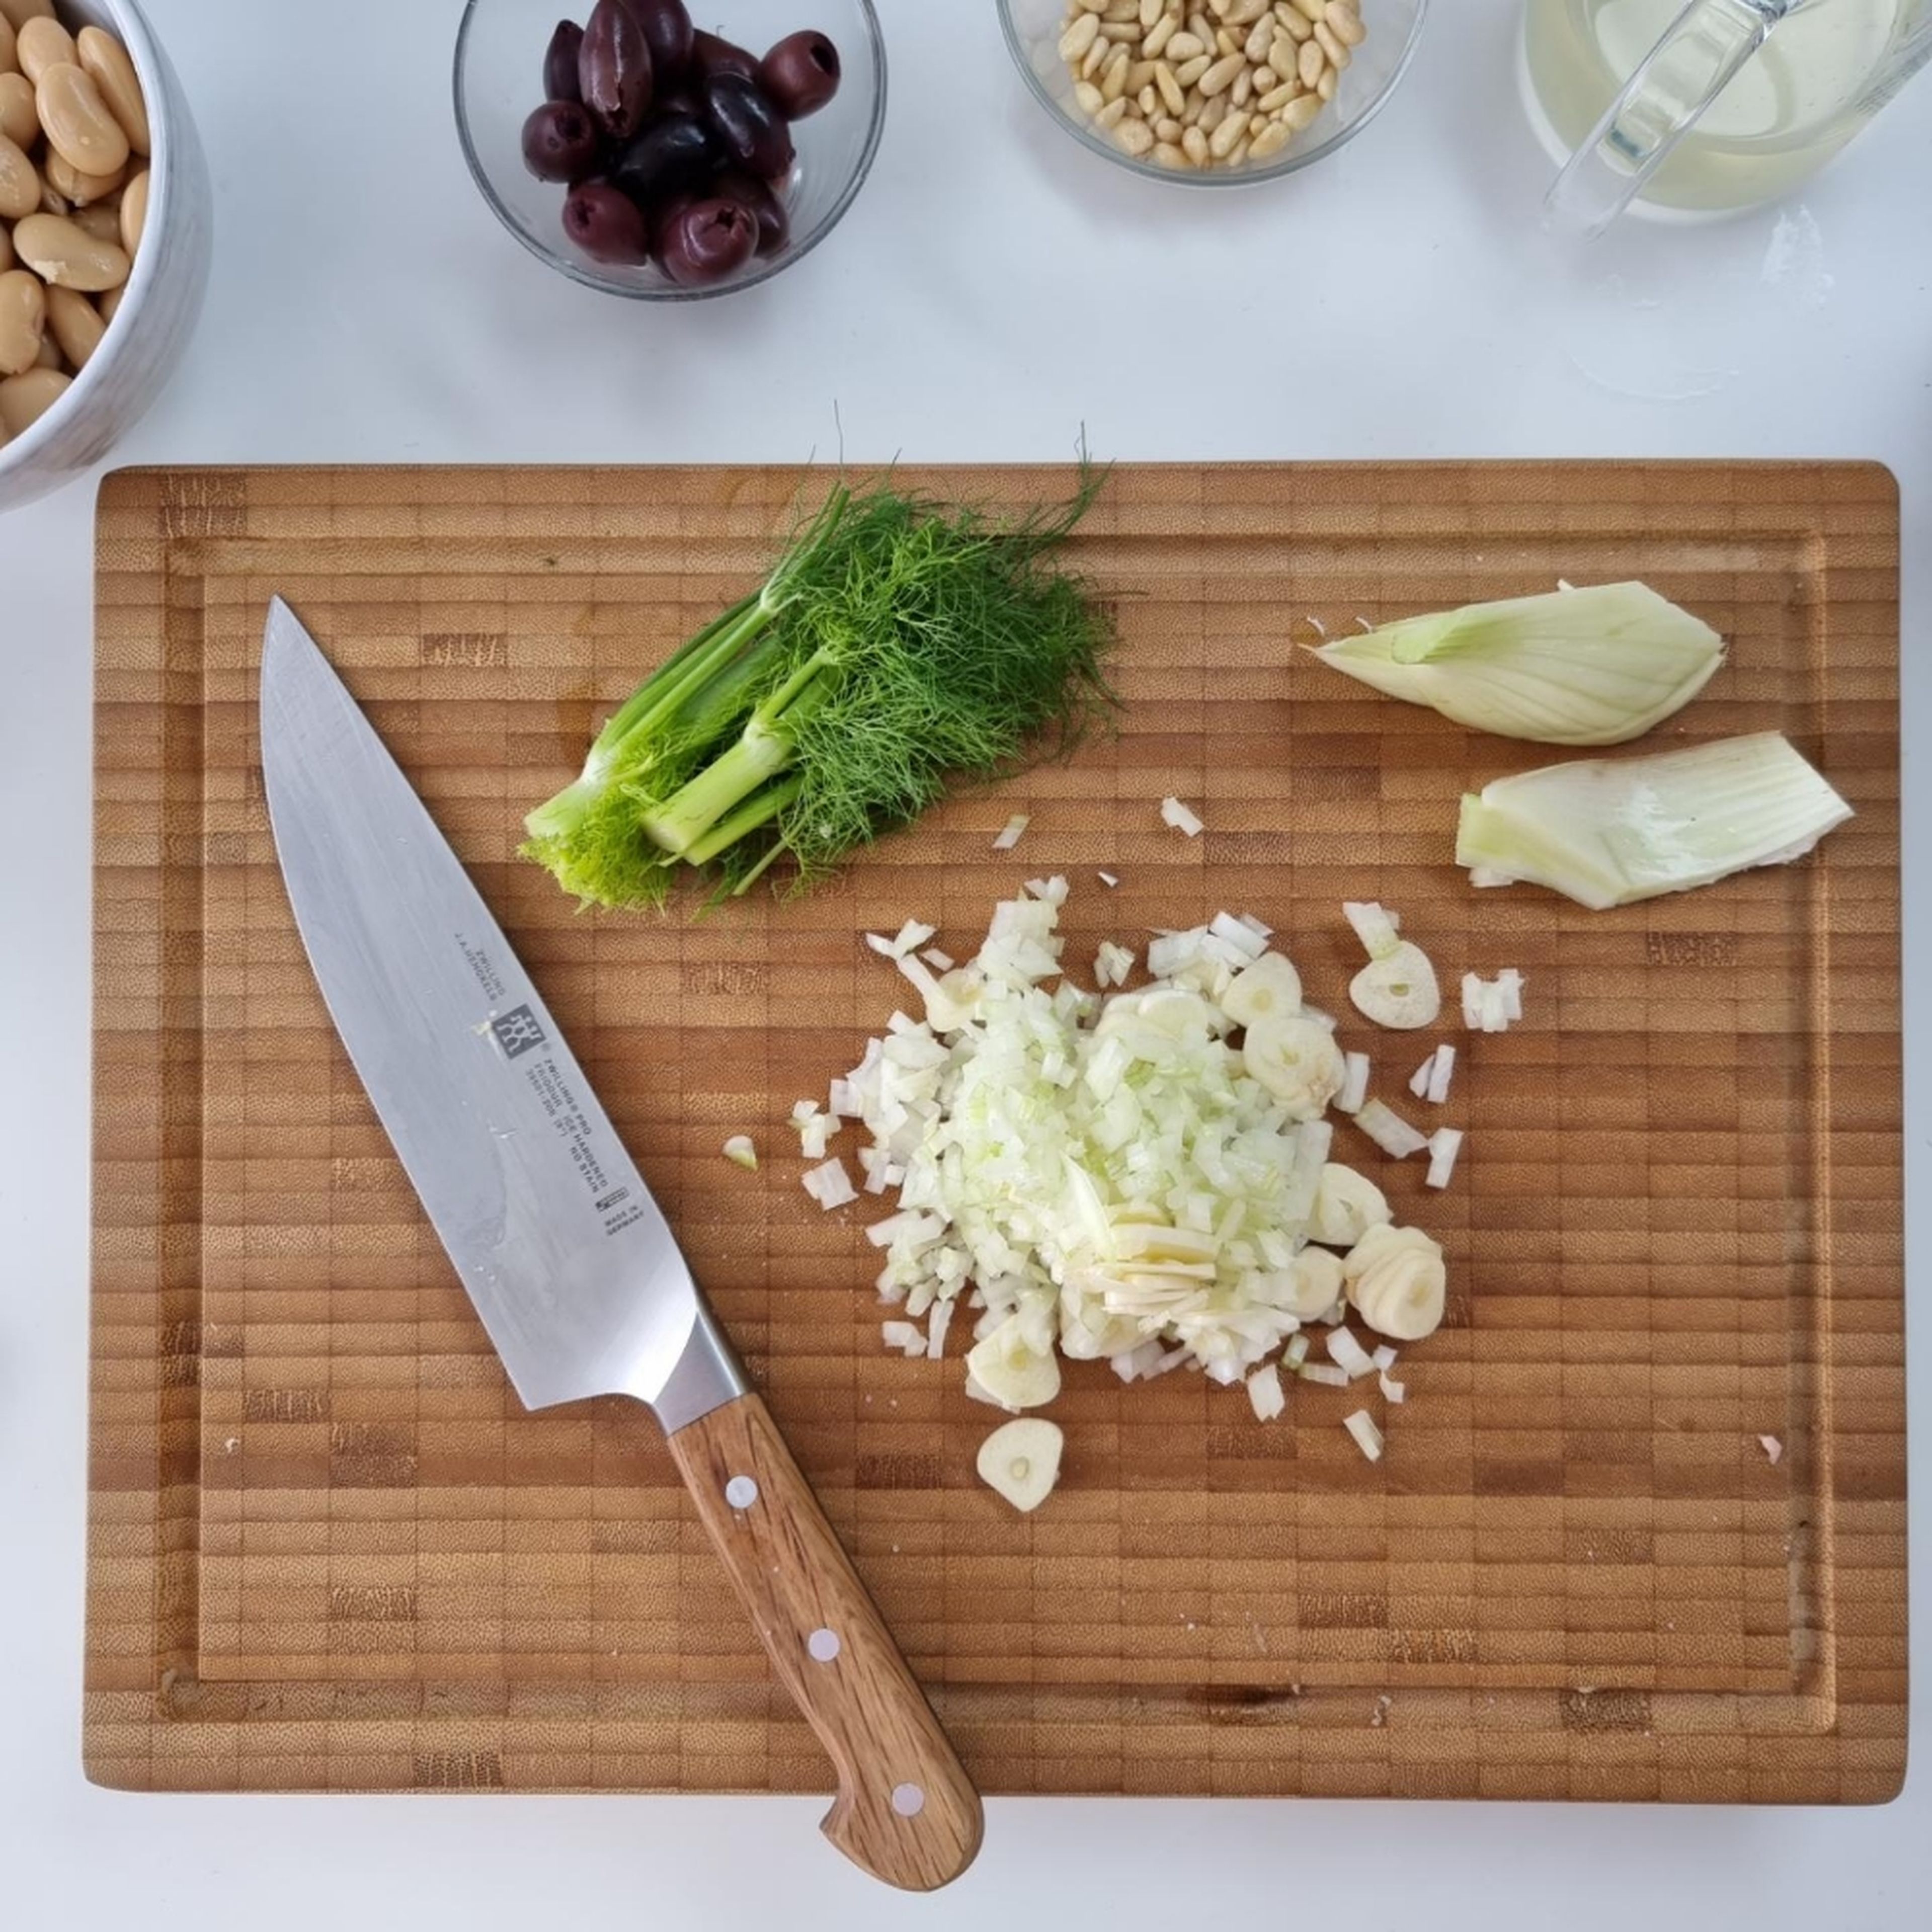 Cut chicken into bite-sized cubes. Clean fennel, quarter and remove the stalk. Drain the white beans well over a sieve. Peel and finely dice garlic and onion.